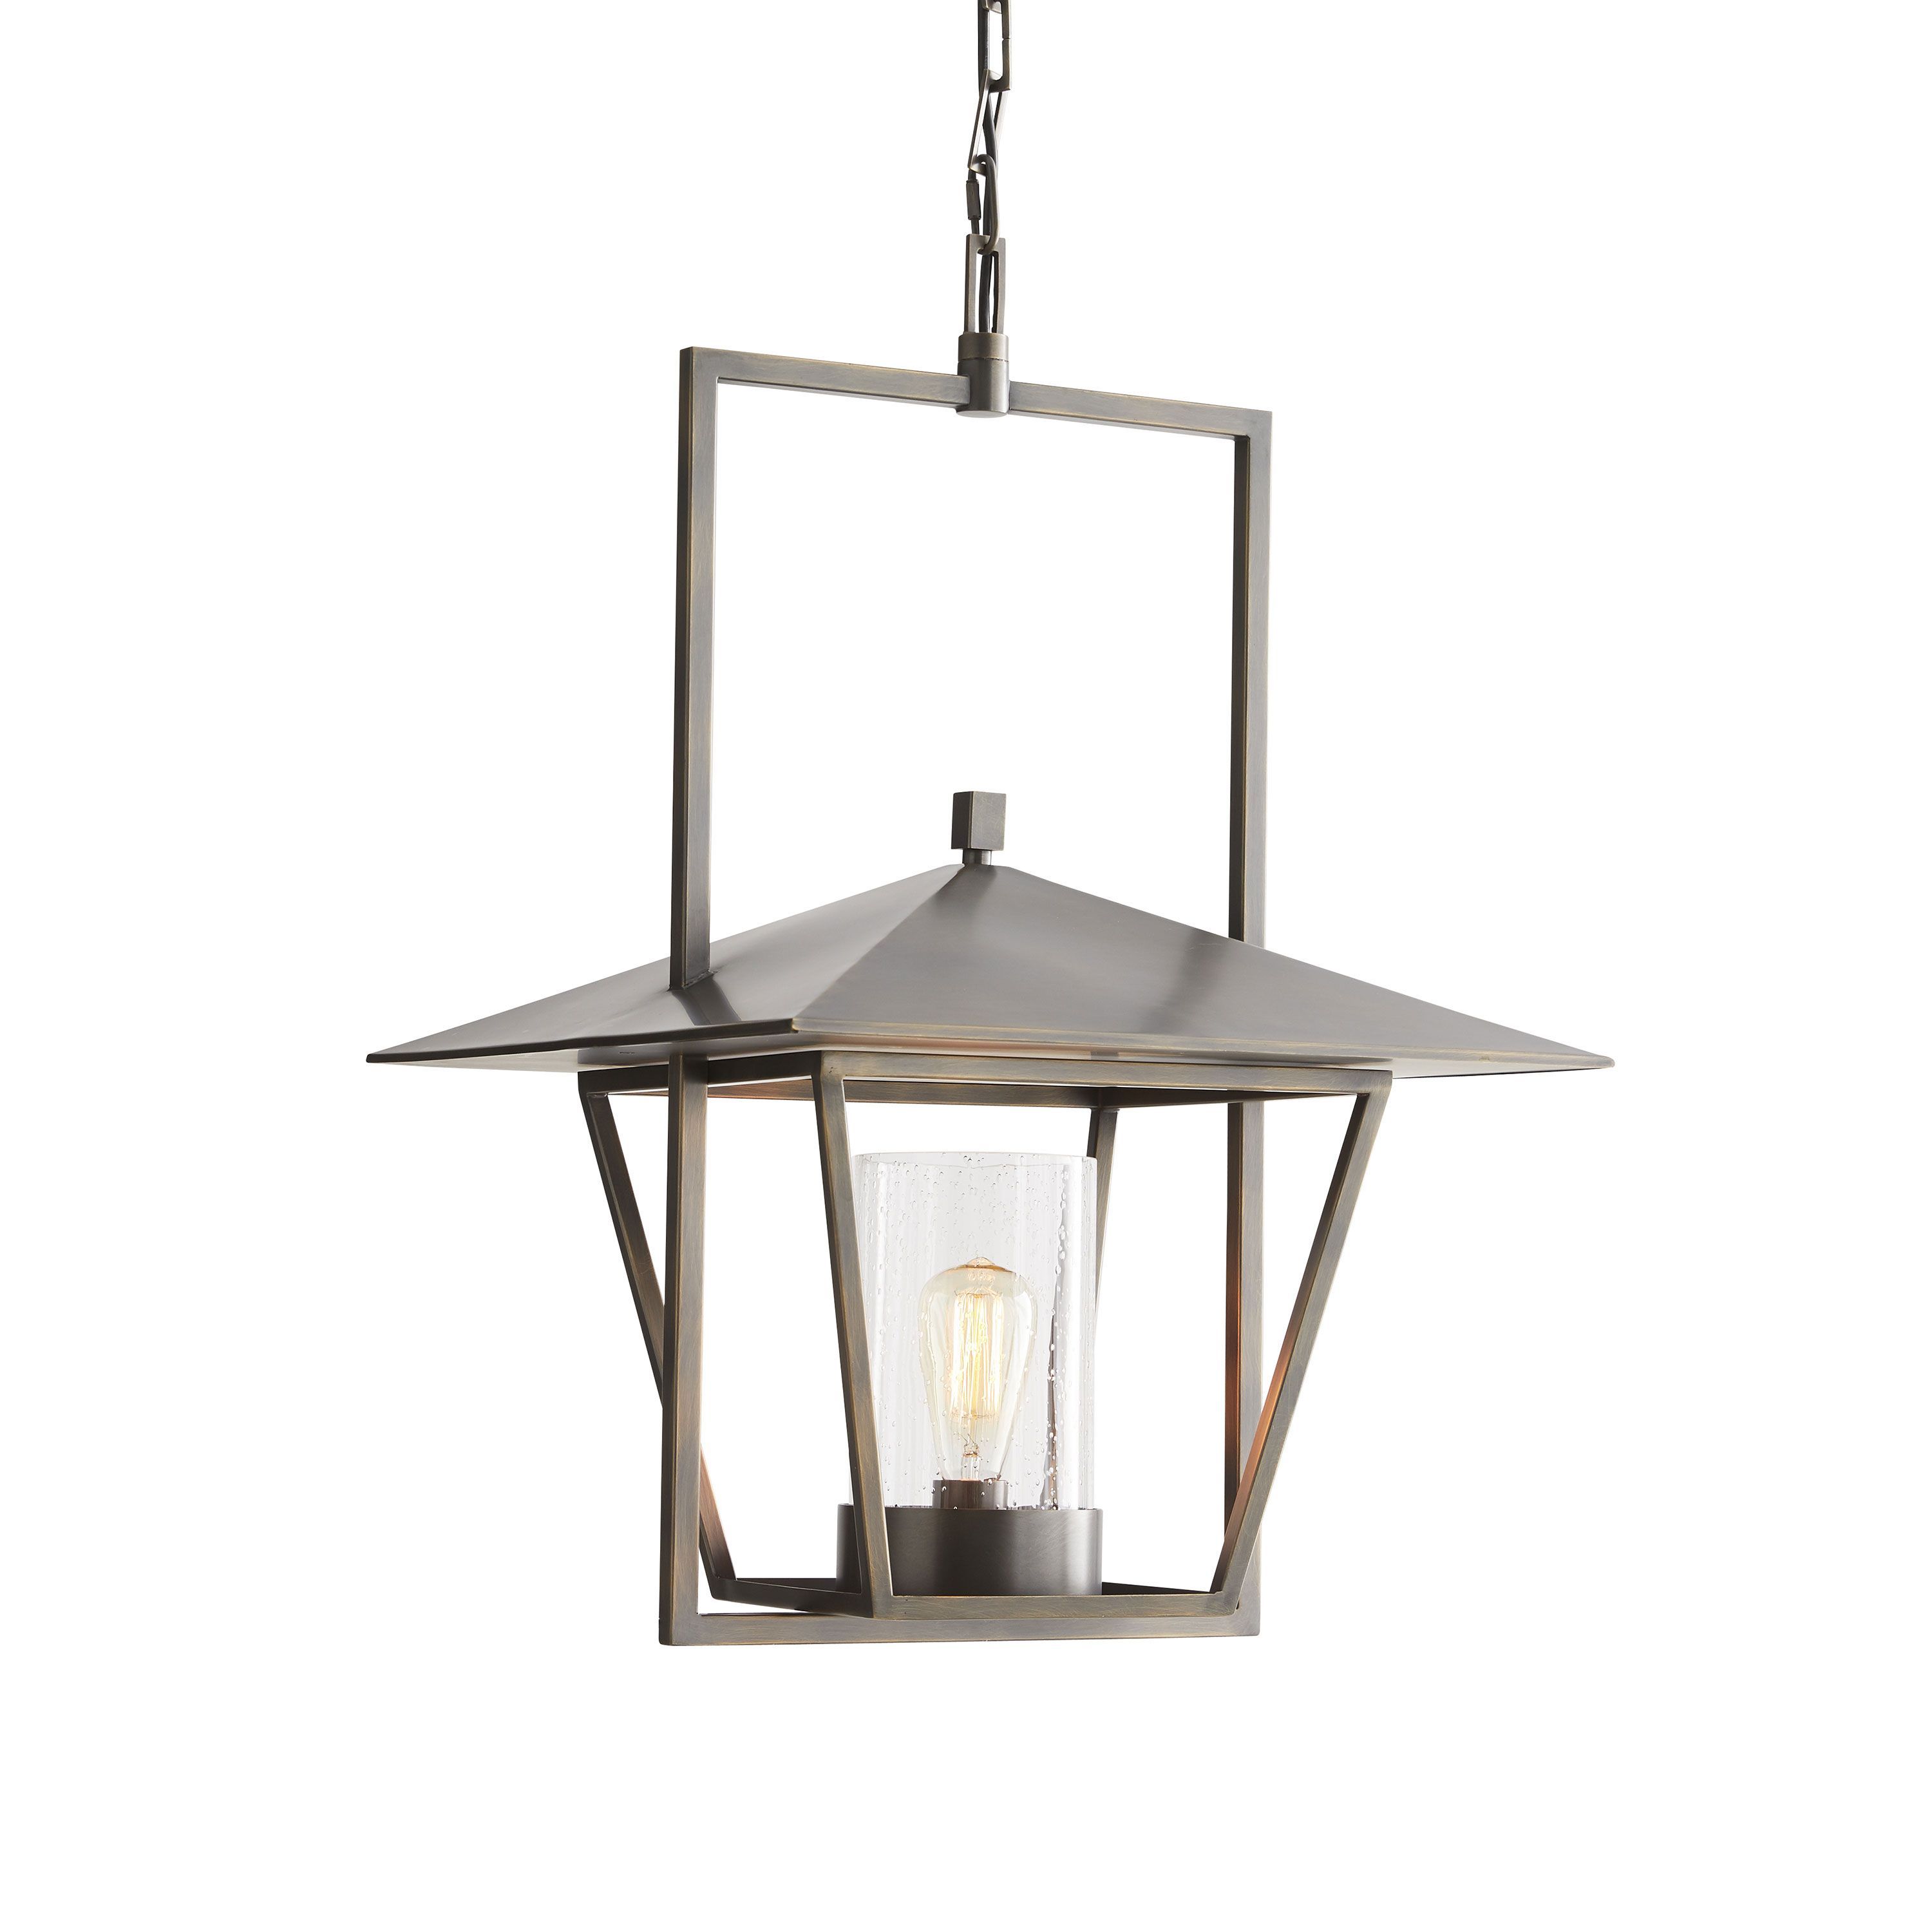 Hanging lamp TEMPLE by Arteriors